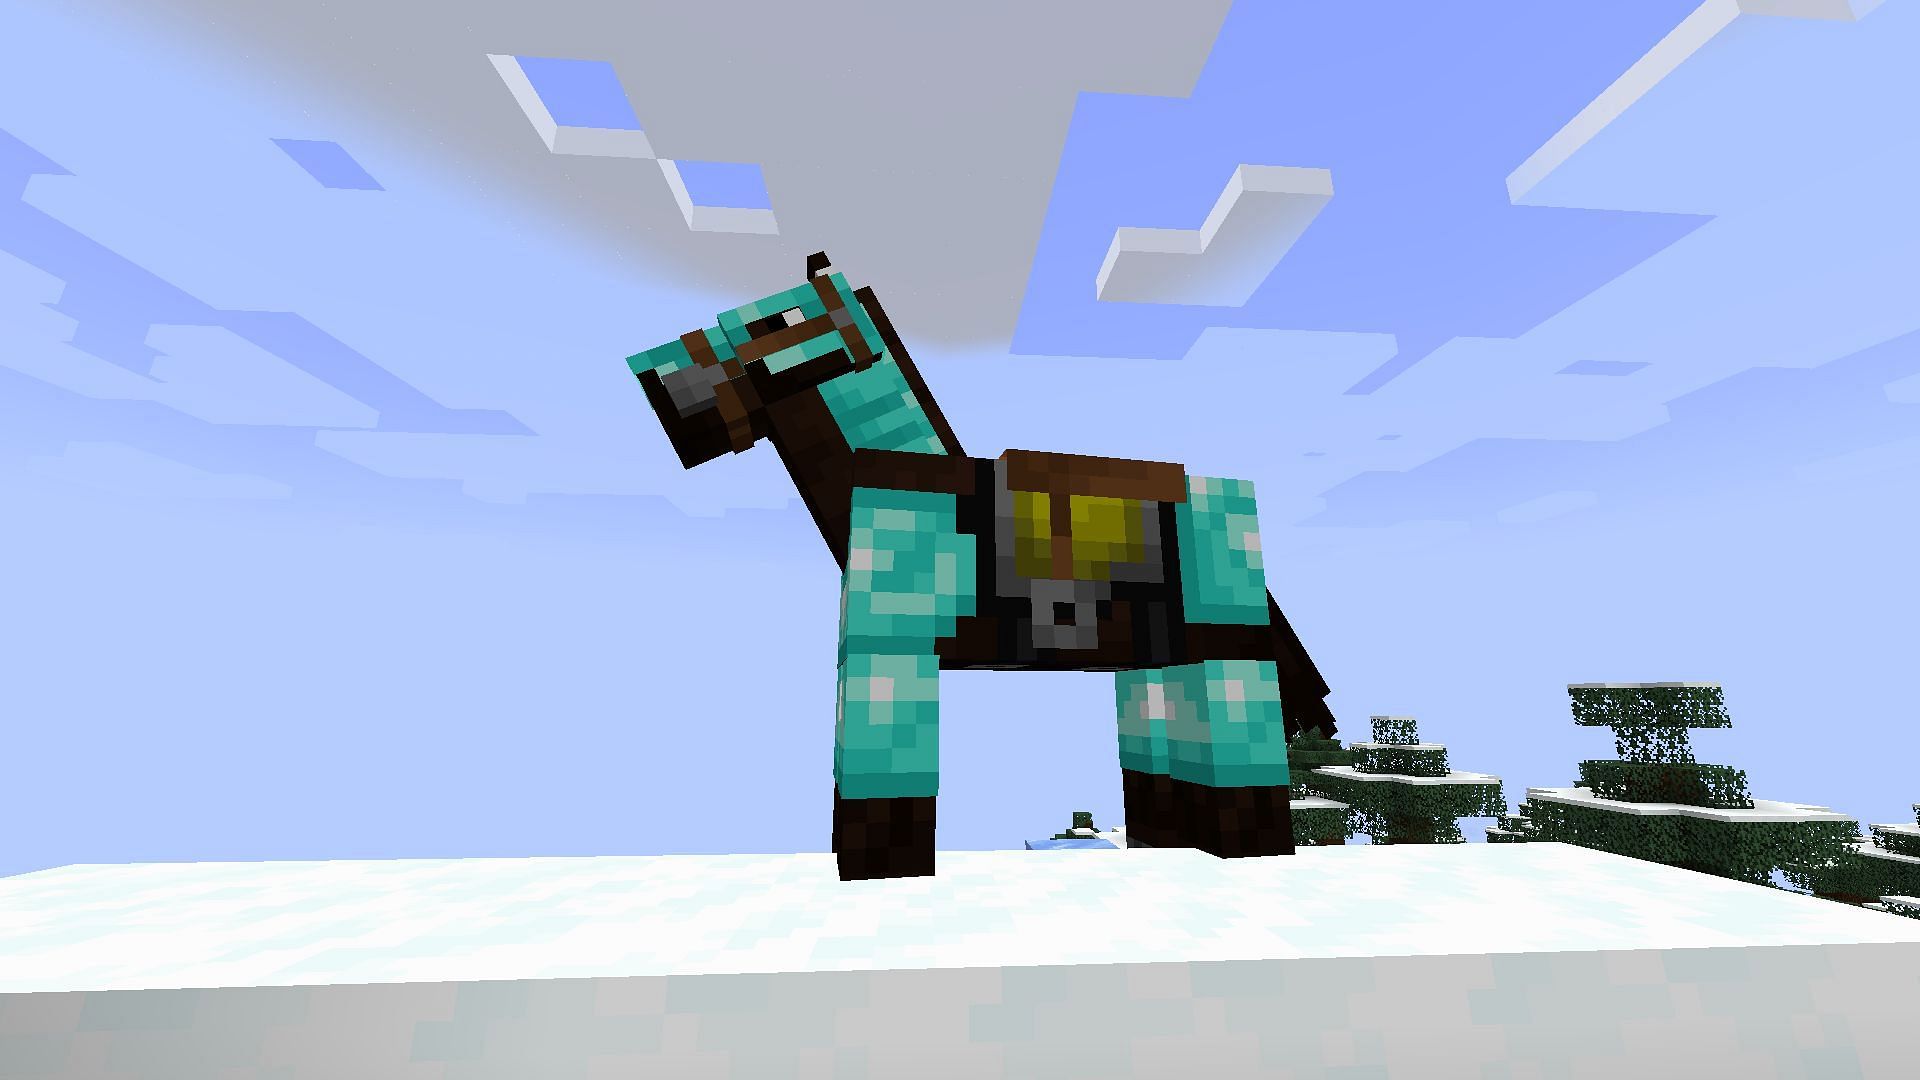 Horse armor is exclusive to the mob in Minecraft (Image via Mojang)